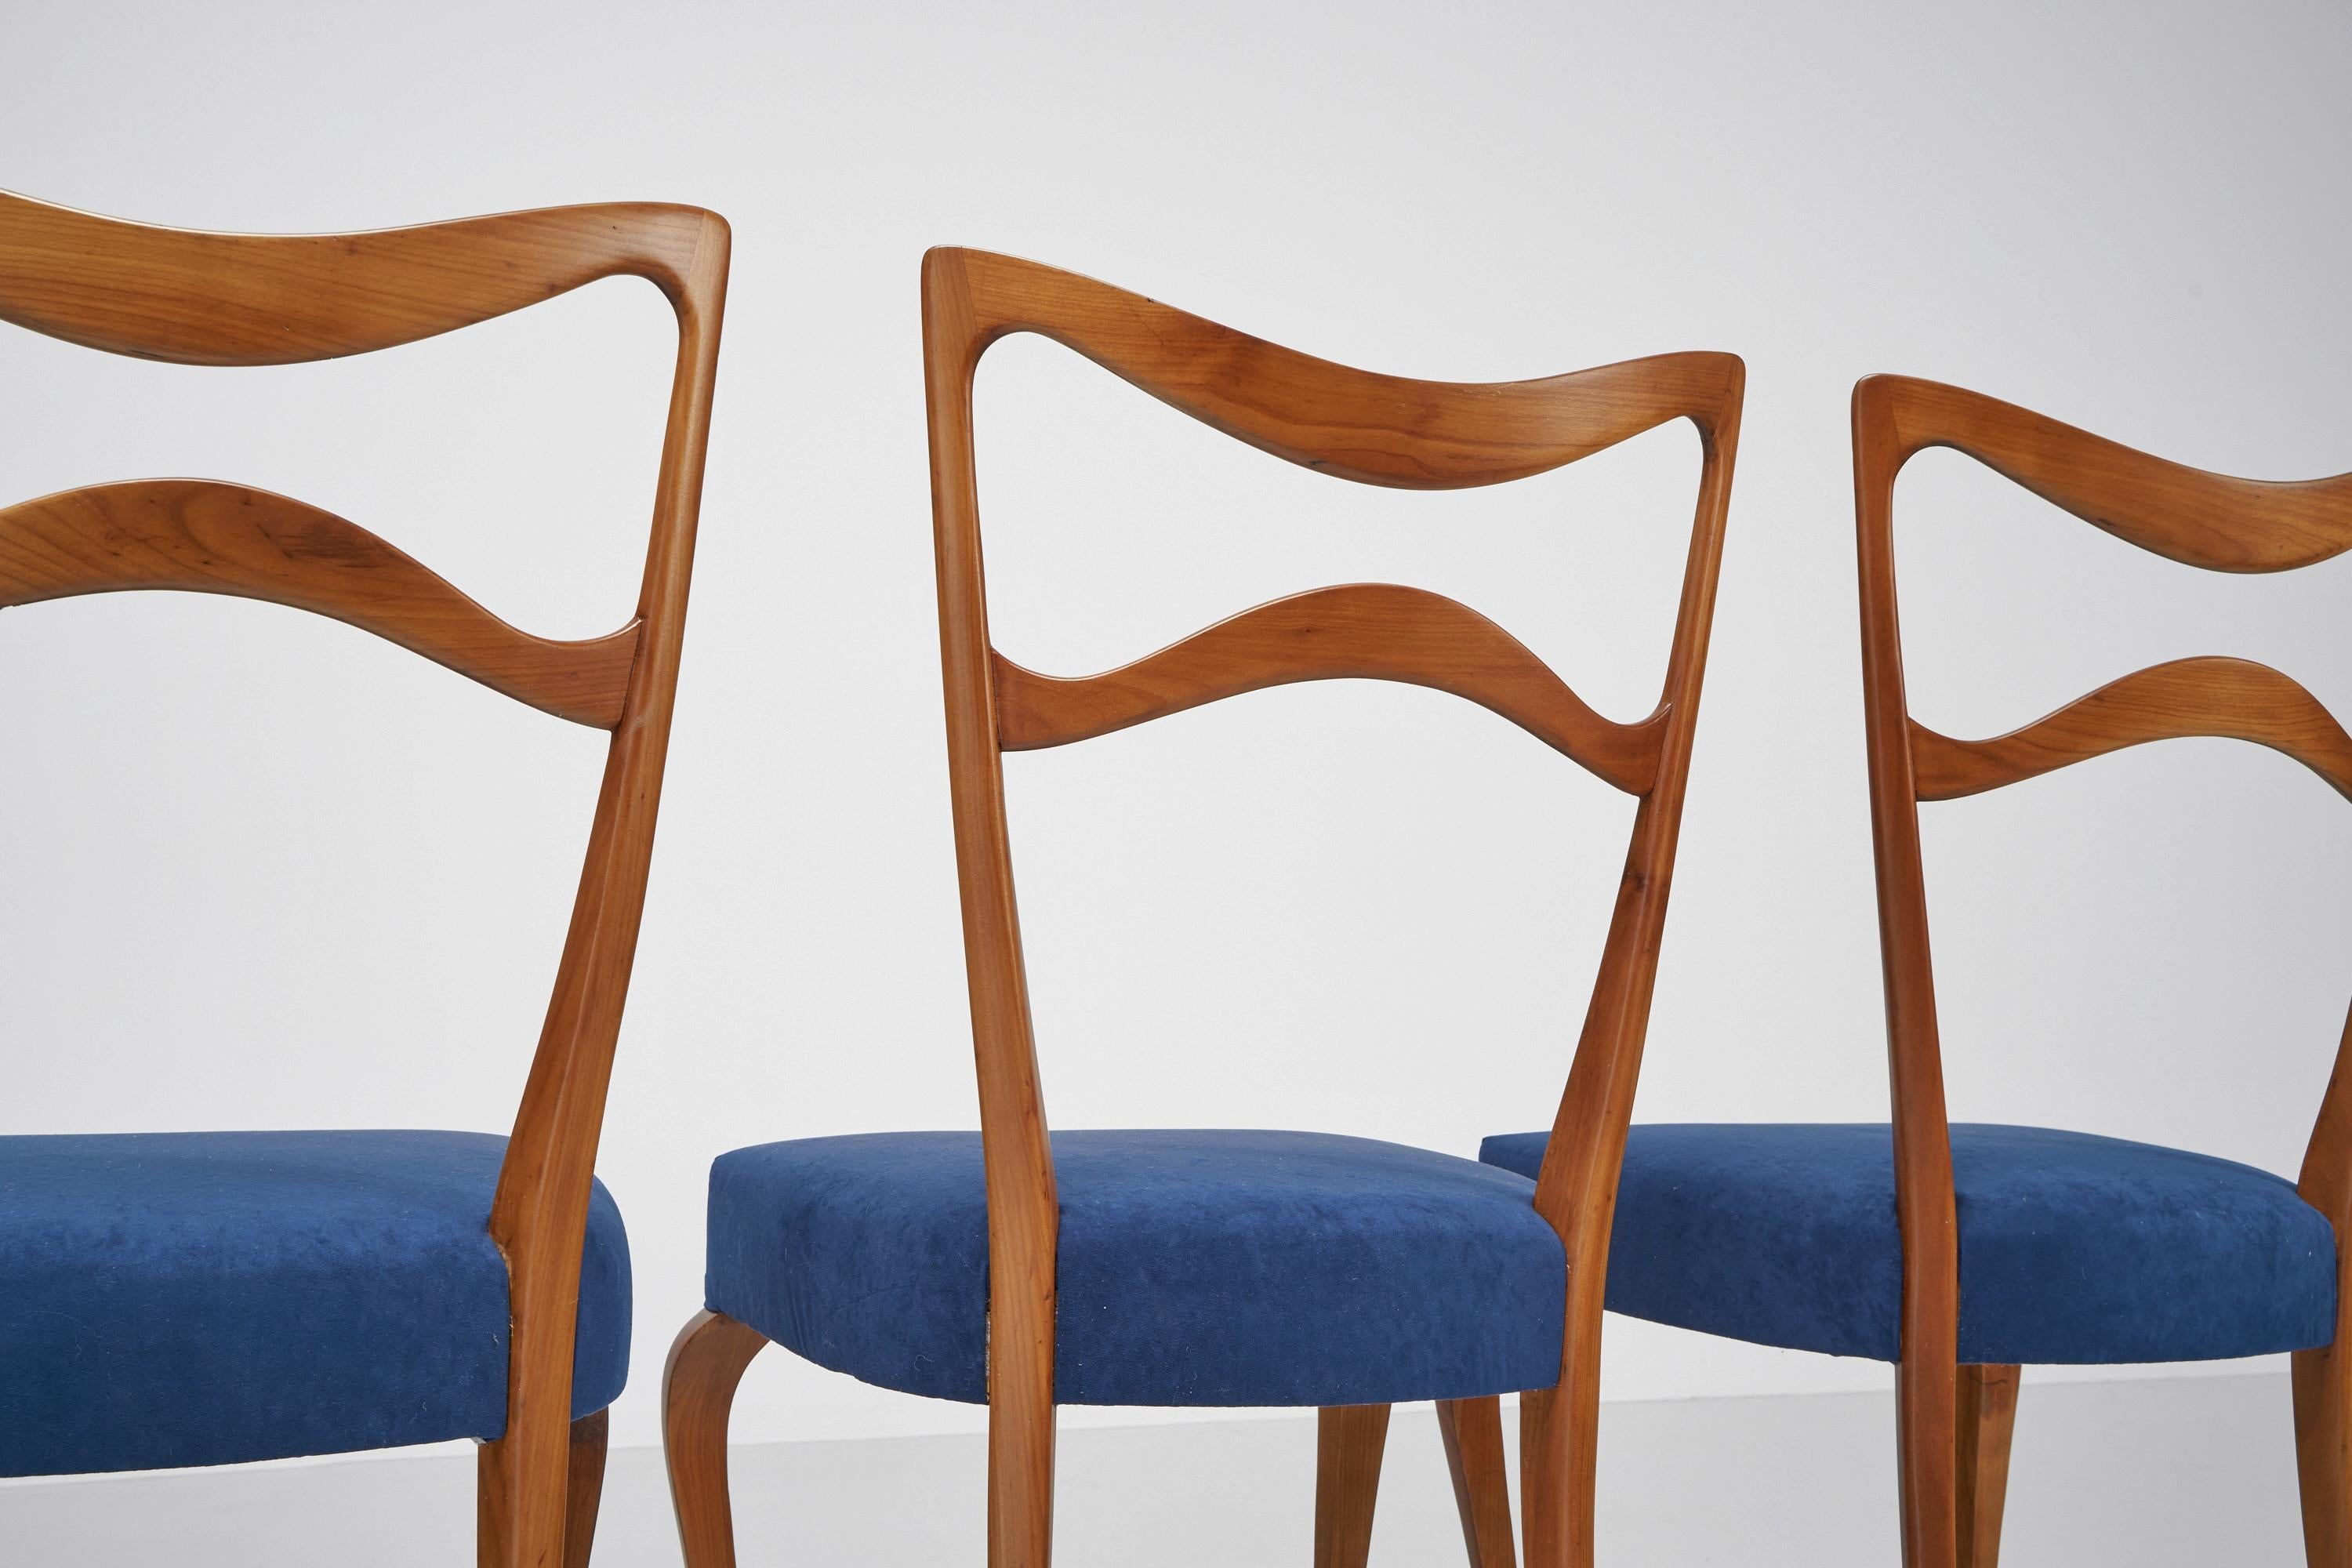 Stunning set of dining chairs designed by Guglielmo Ulrich and produced in Italy in 1950. This set consists of six chairs and has been fully restored in our own atelier with a matte gloss finish, and are reupholstered in a blue velvet. The chairs